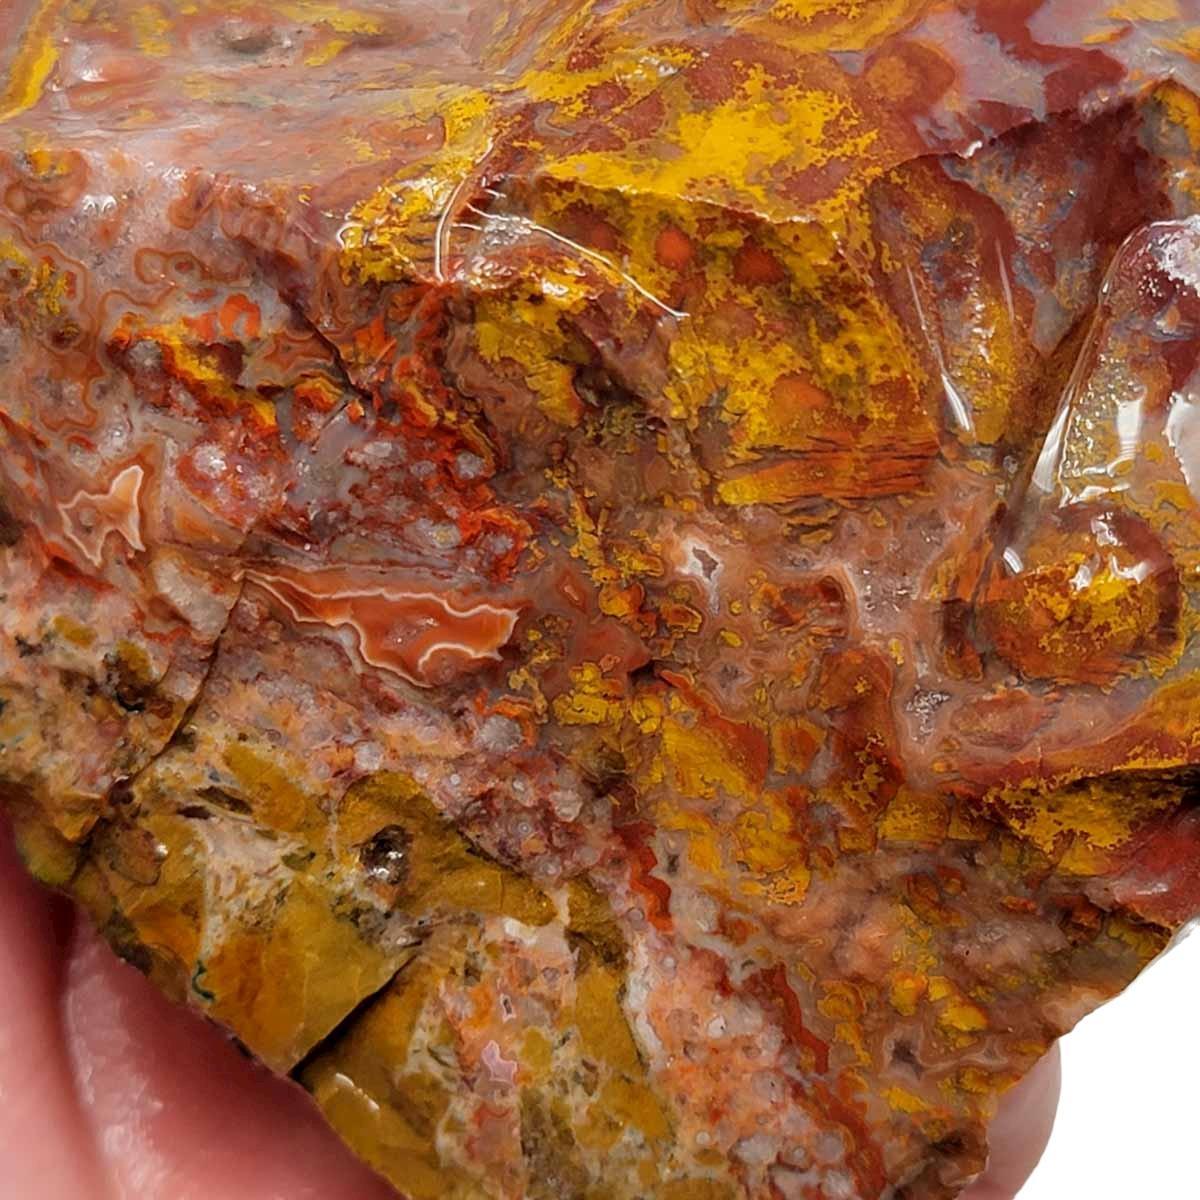 Apple Valley Agate Rough Chunk! - LapidaryCentral